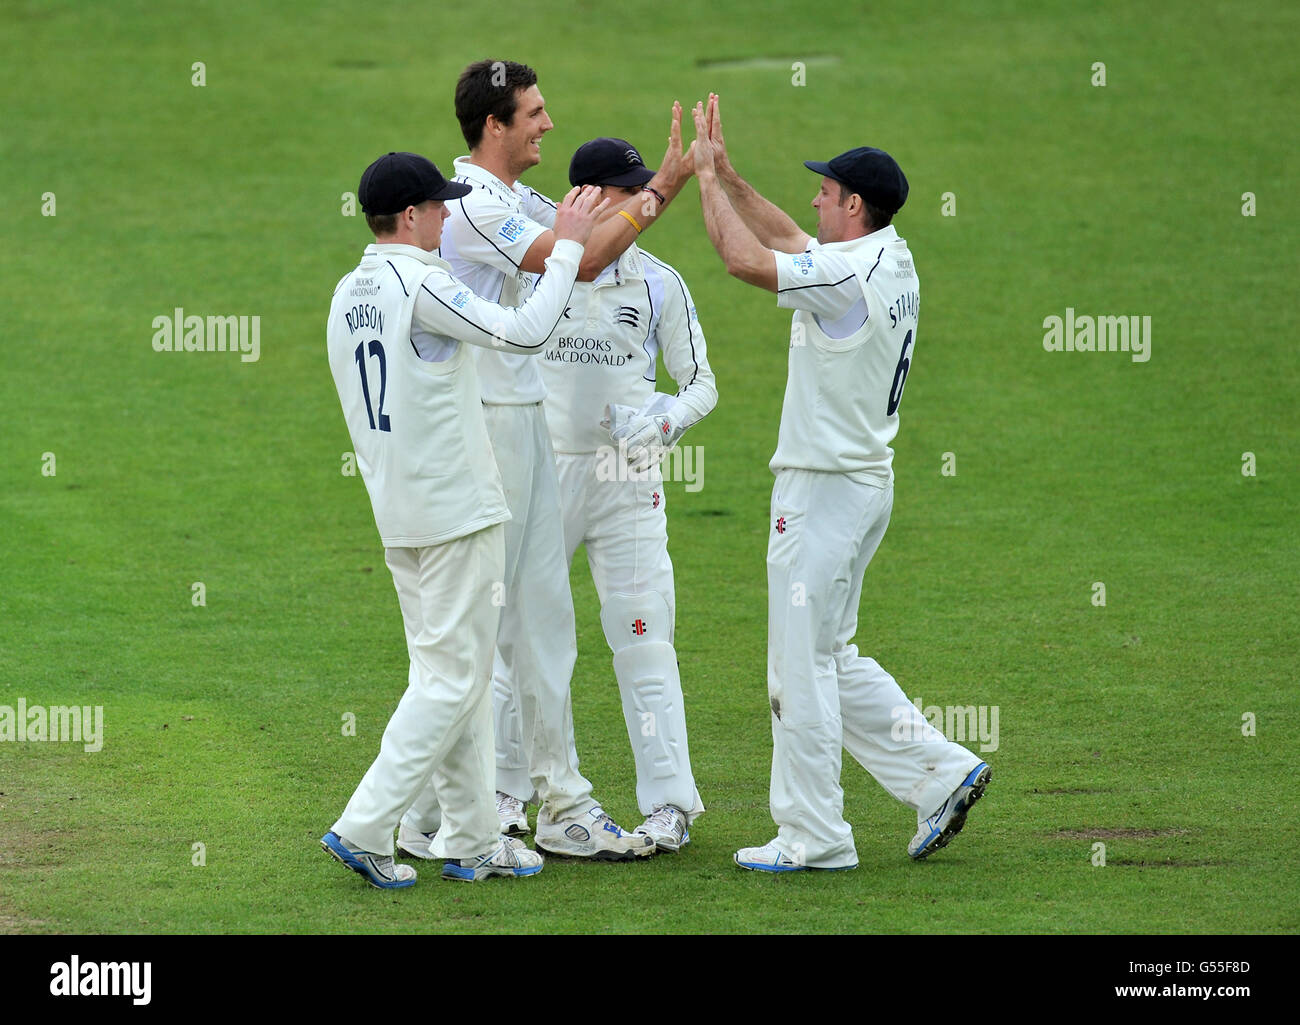 Middlesex's Steven Finn (second left) celebrates taking the wicket of Nottinghamshire's Stuart Broad caught by Middlesex's Andrew Strauss (right) during the LV= County Championship, Division One match at Trent Bridge, Nottingham. Stock Photo